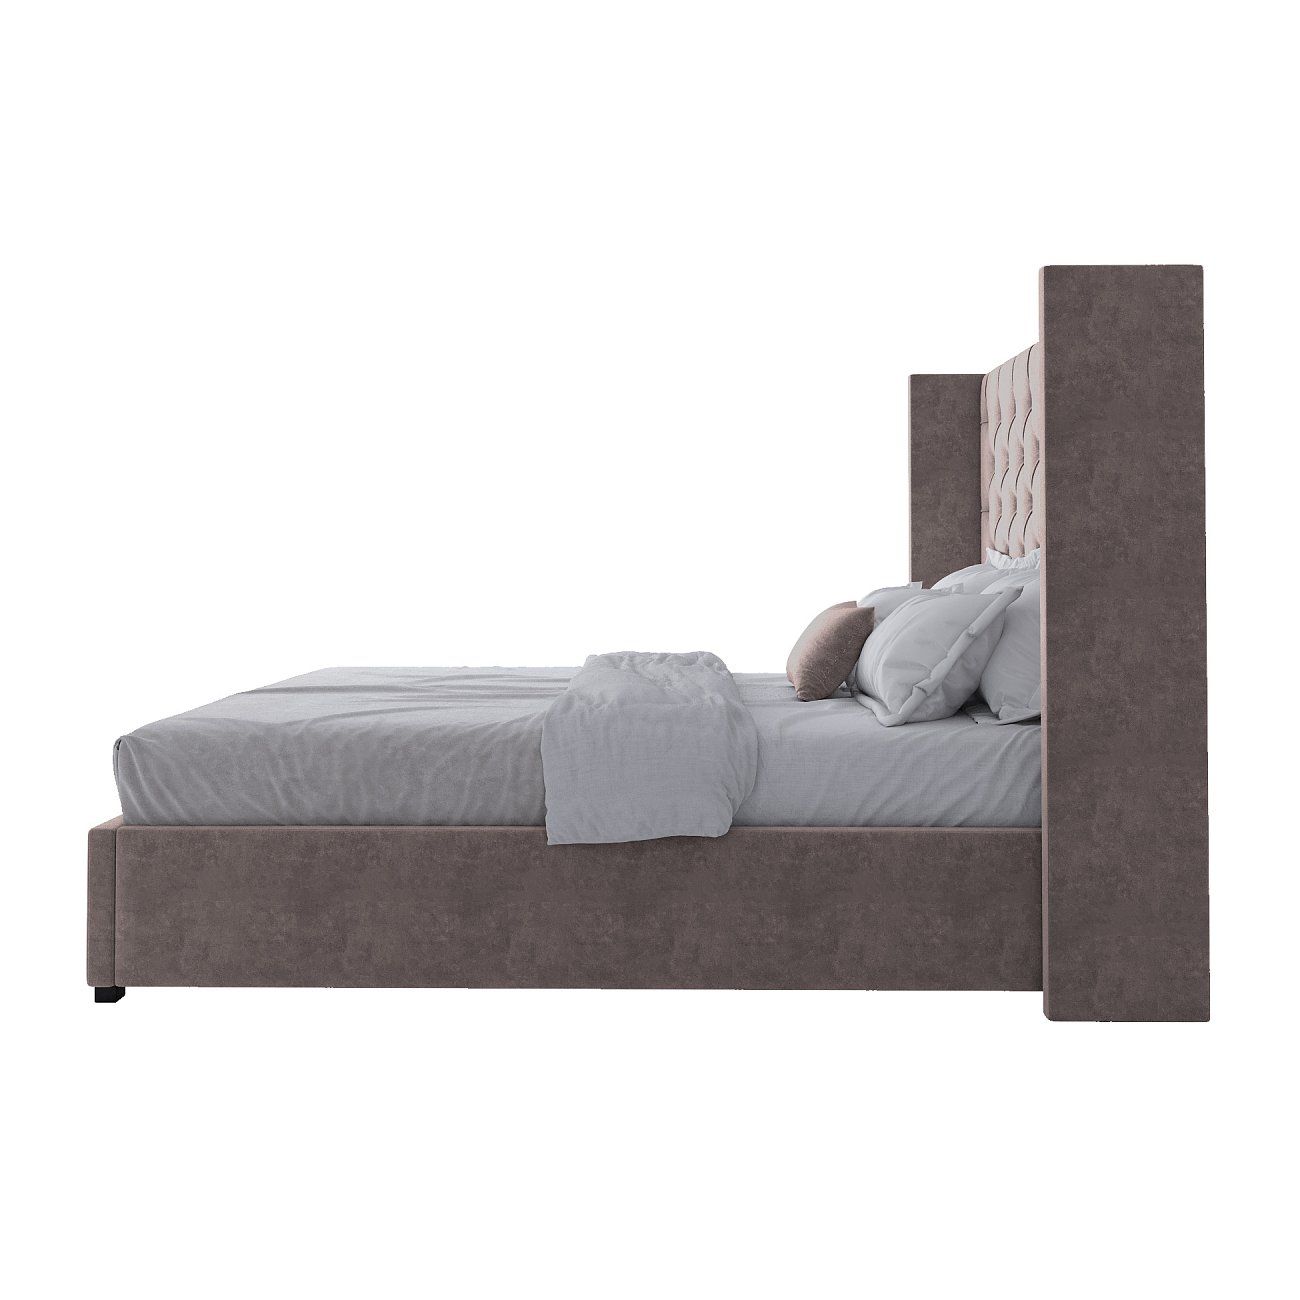 Double bed 160x200 cm grey-brown velour with carriage tie without studs Wing-2